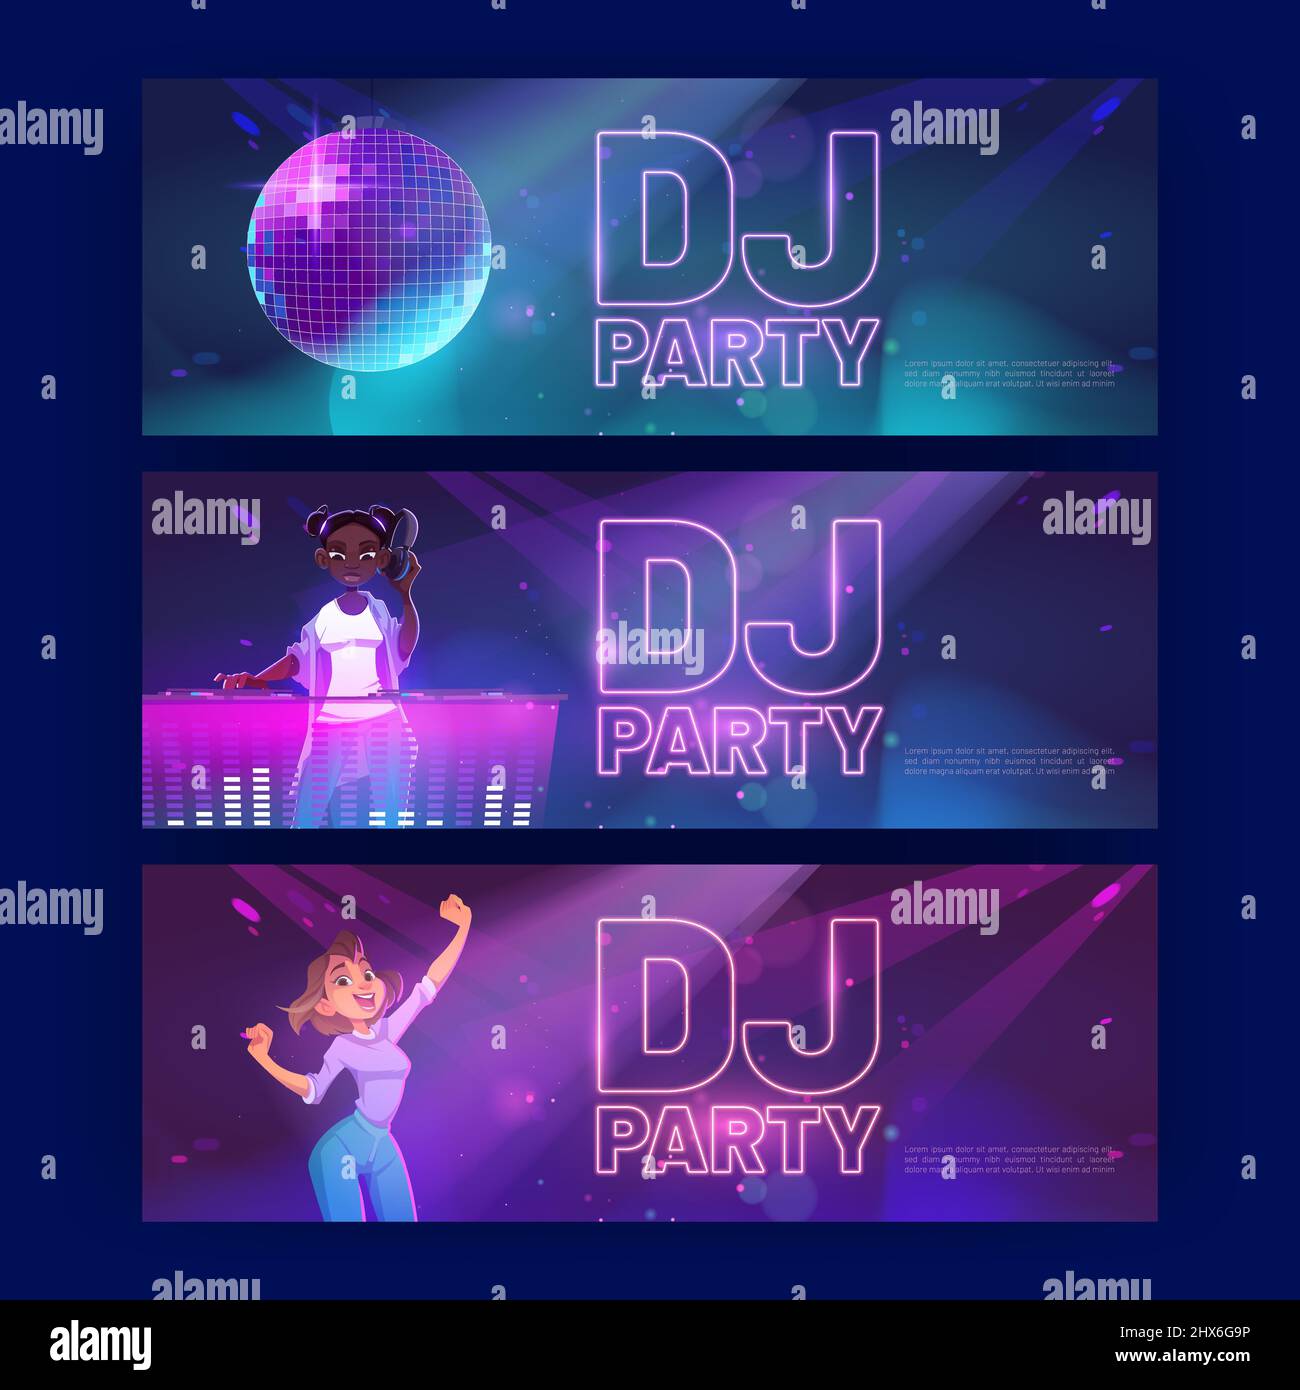 Dj party banners with disco ball, girl dance and mixer console. Vector invitation flyers to nightclub, music club, discotheque with cartoon illustration of woman dj with headphones in neon light Stock Vector